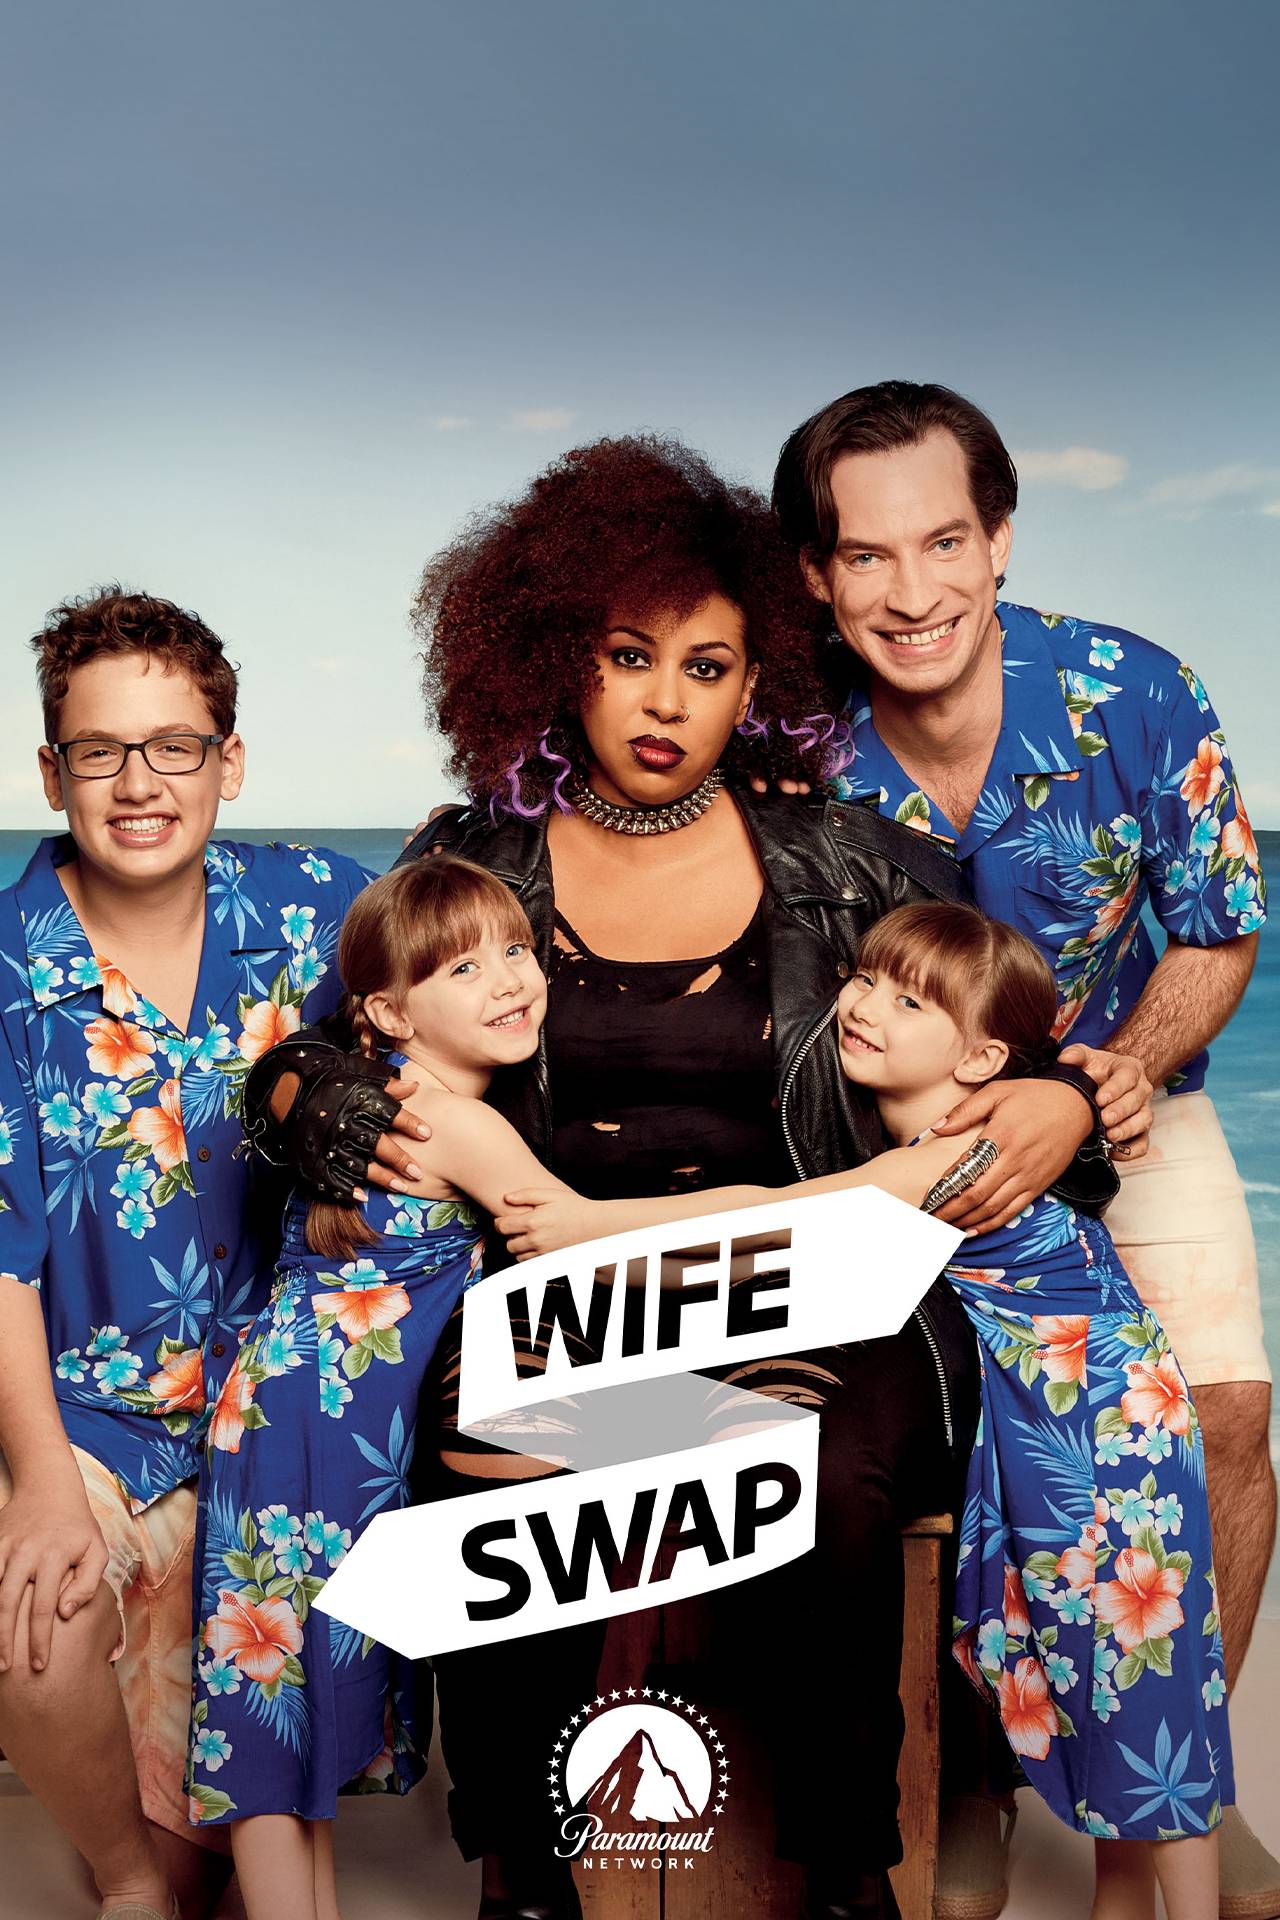 Home Video Wife Swap video casting